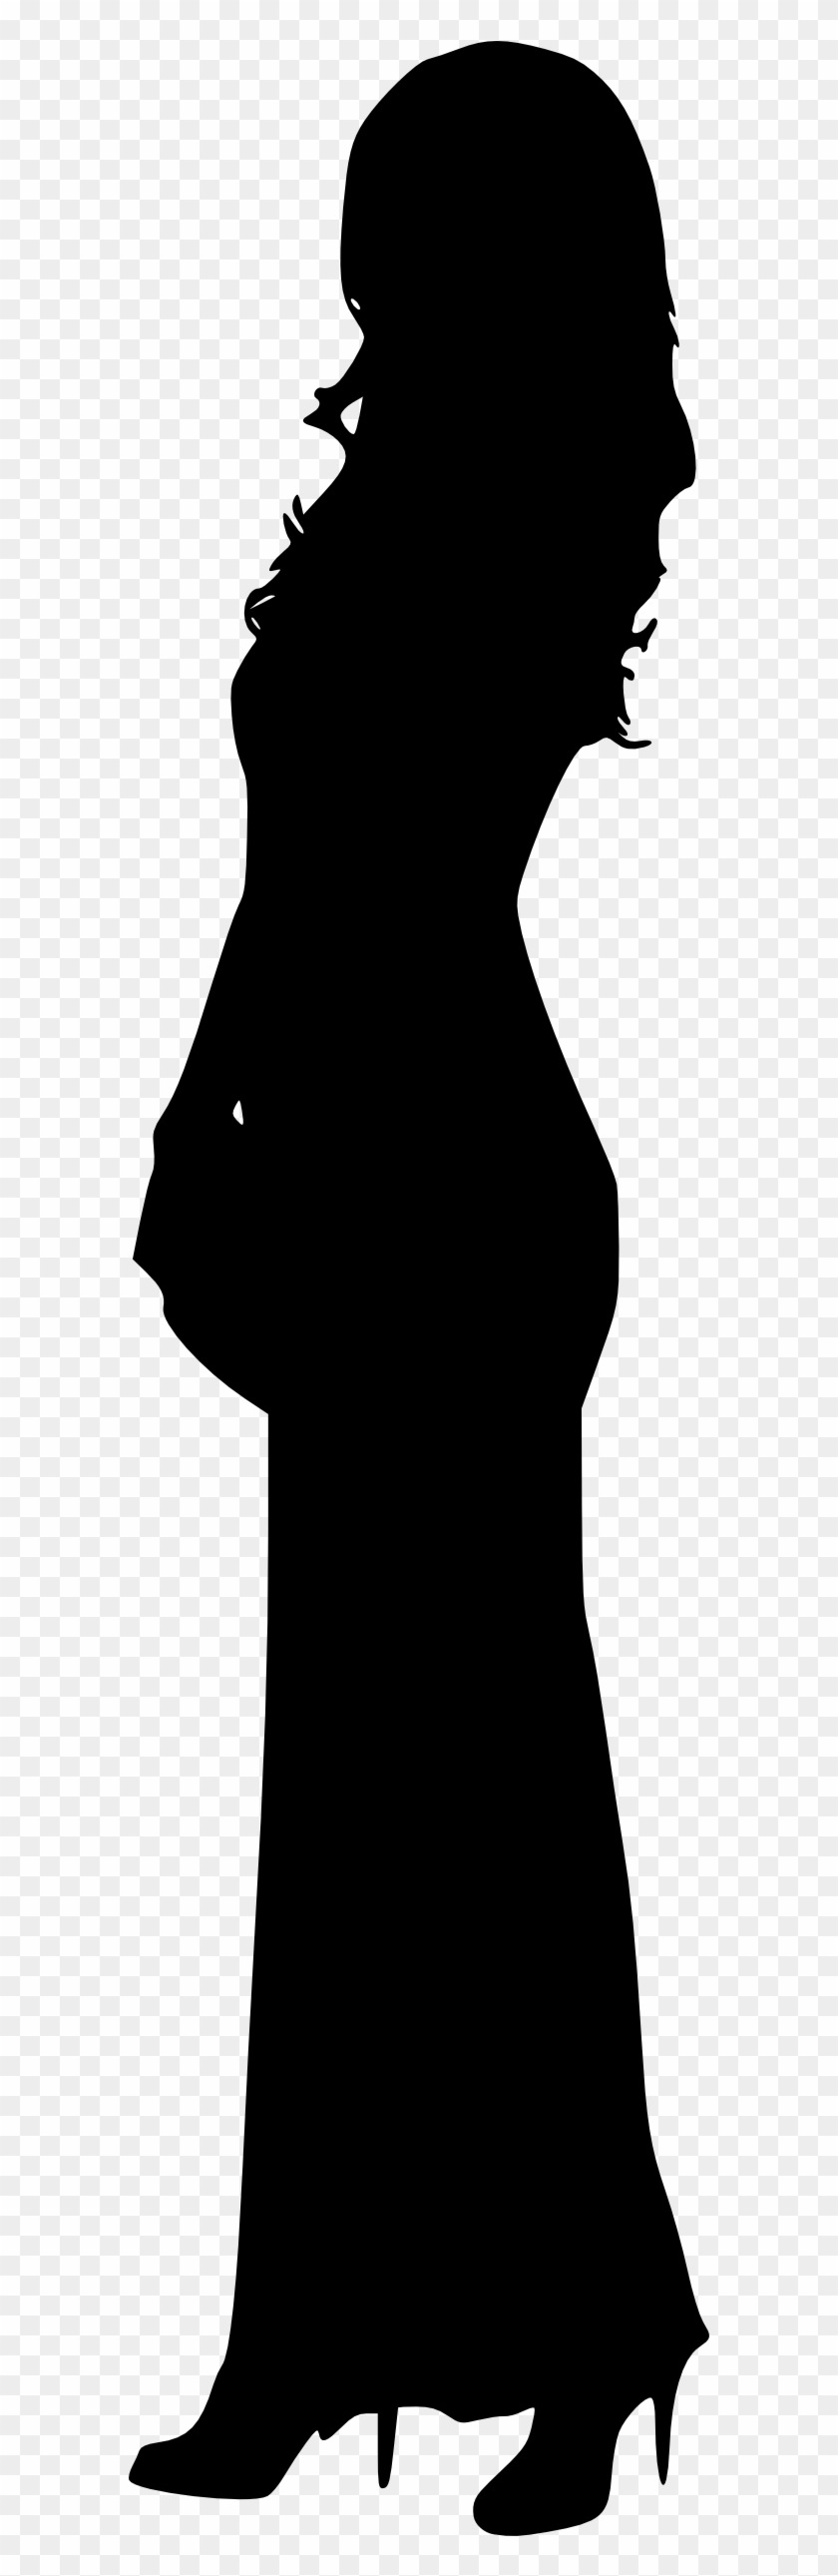 30 Woman Silhouettes - Woman Silhouette Png #370897